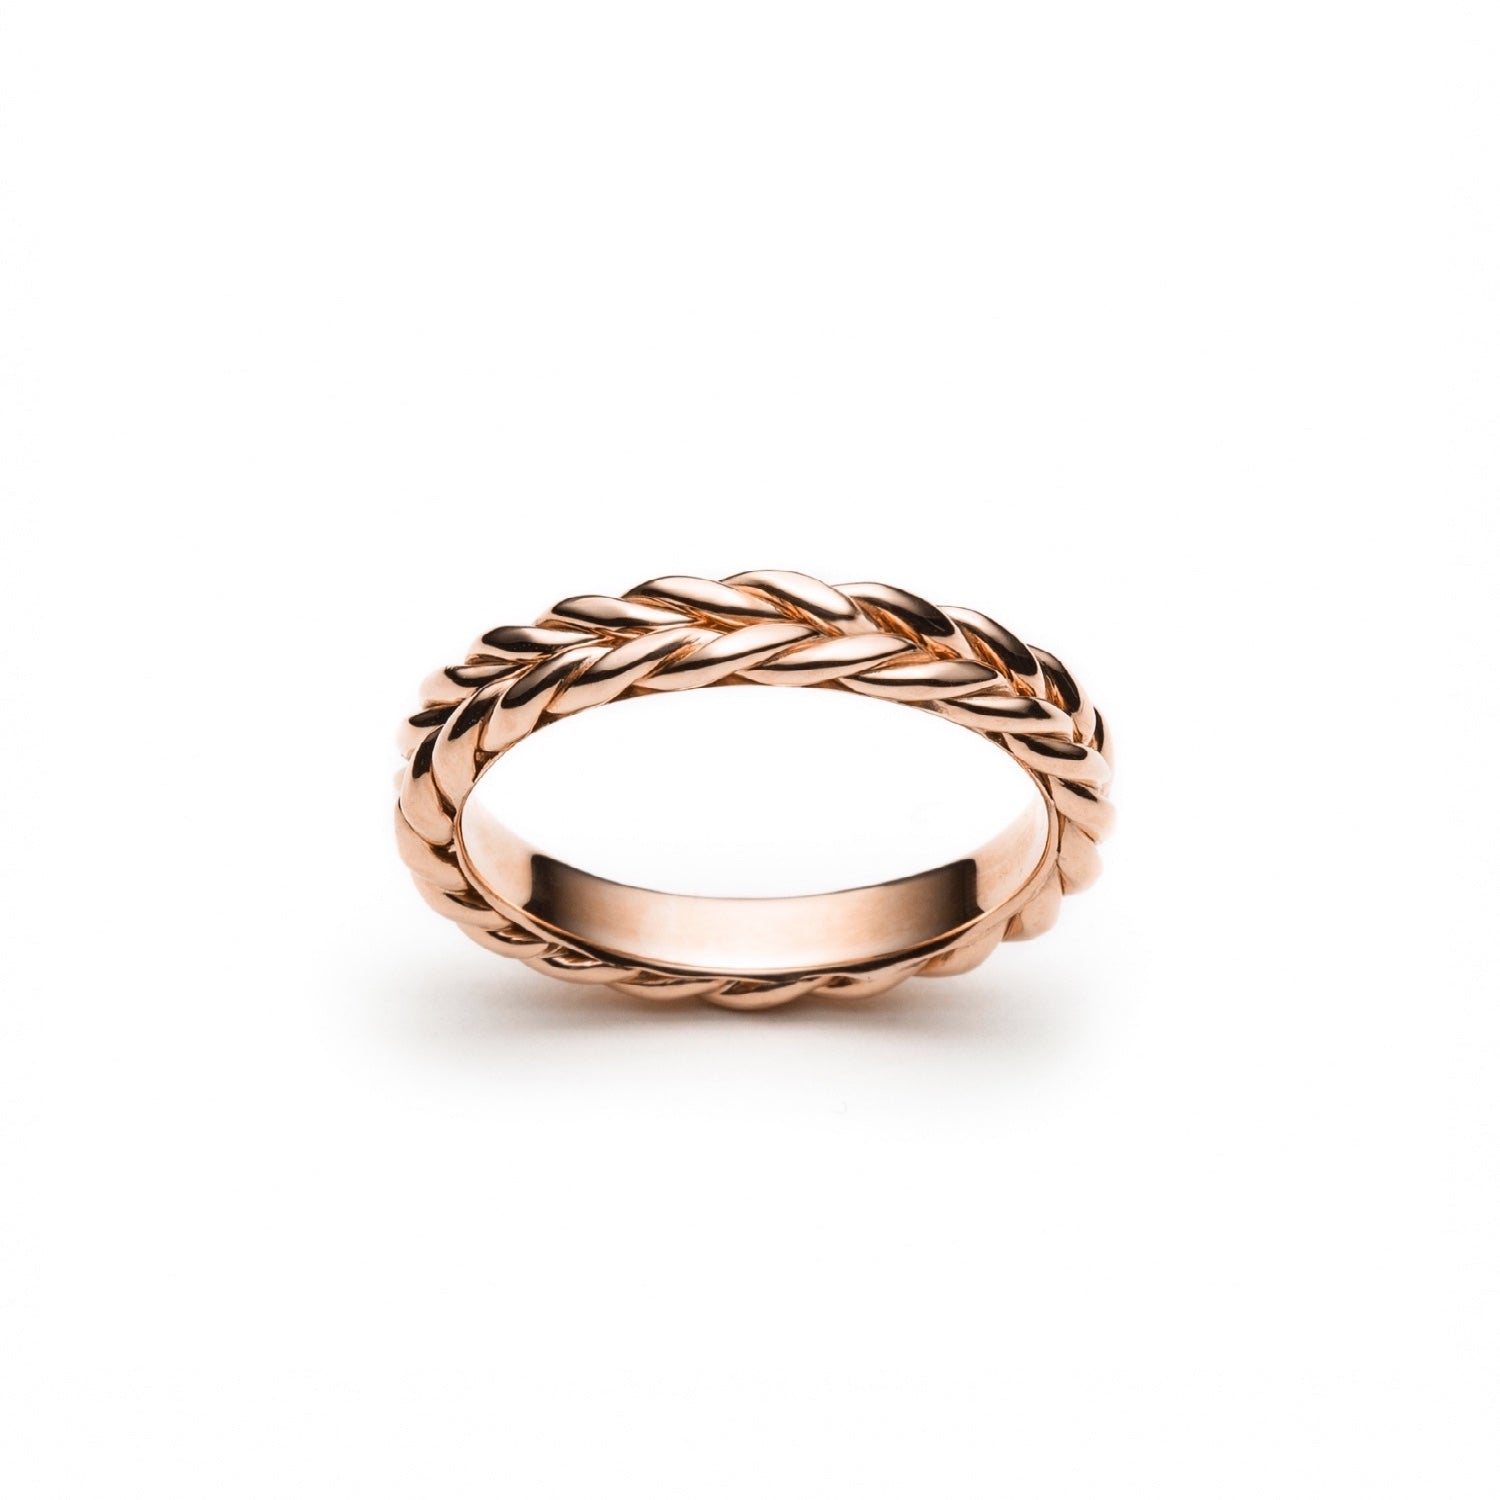 Signature Braided Polished Finish Standard Fit 4-5 mm Wedding Band in Rose Gold